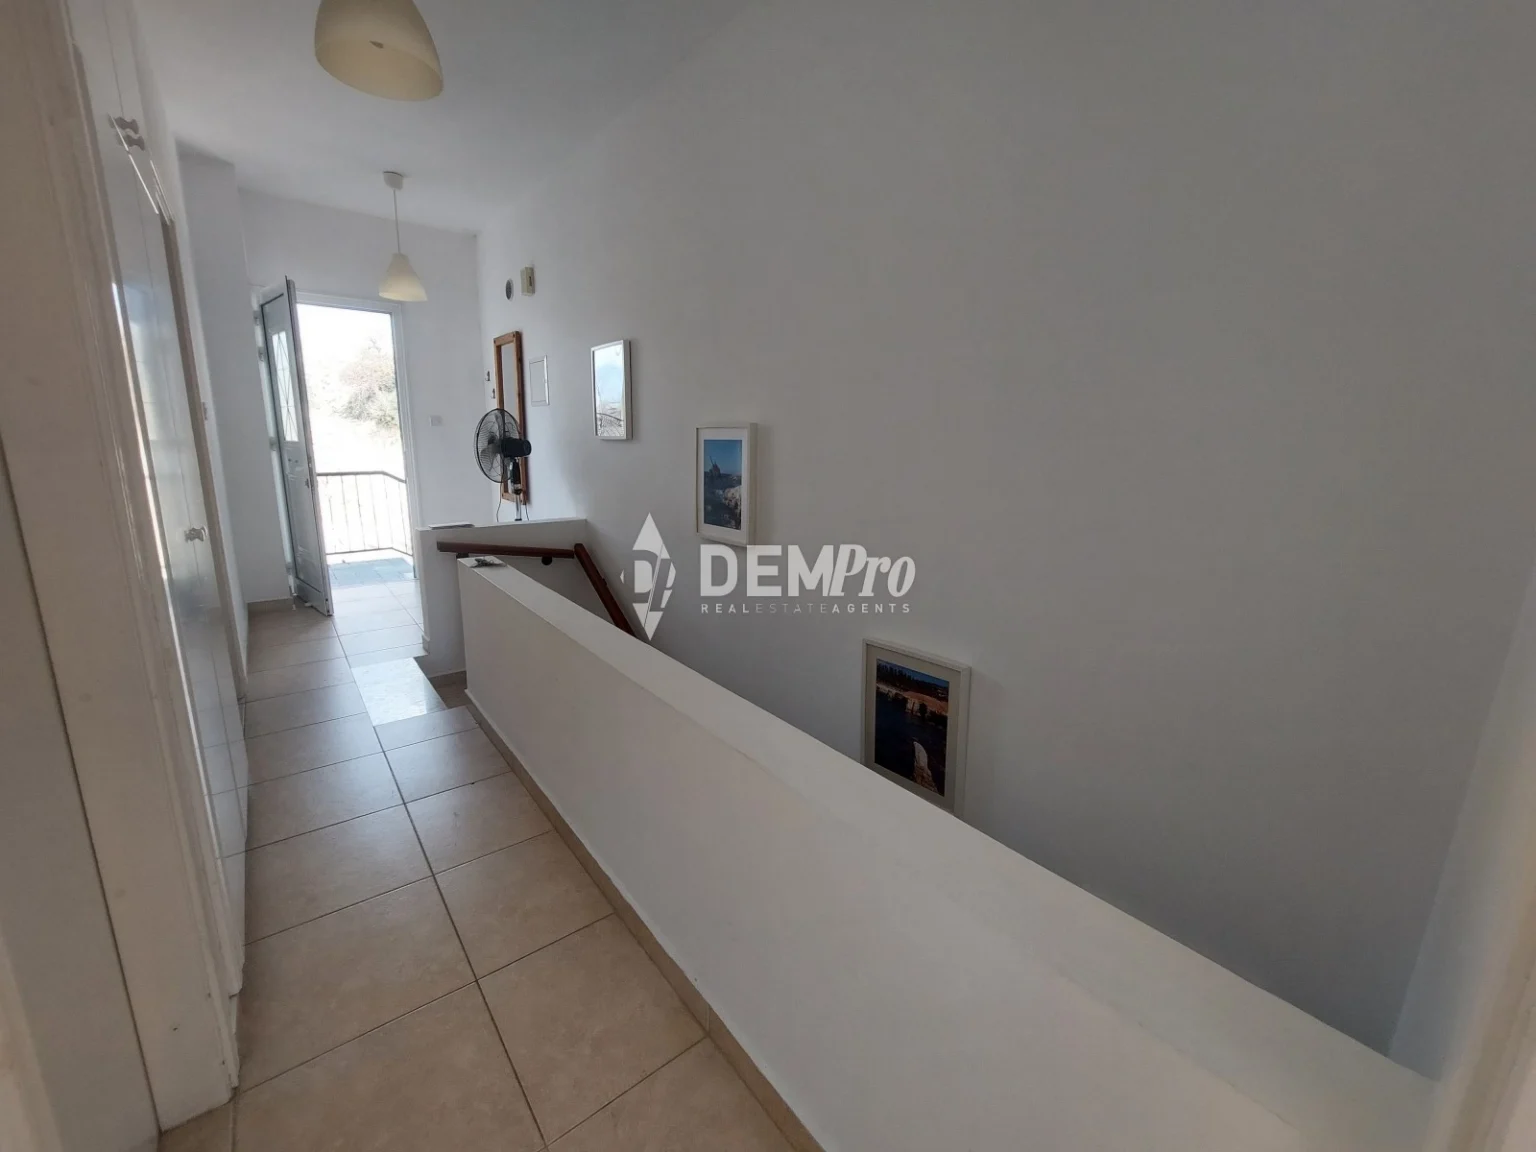 2 Bedroom House for Rent in Tsada, Paphos District